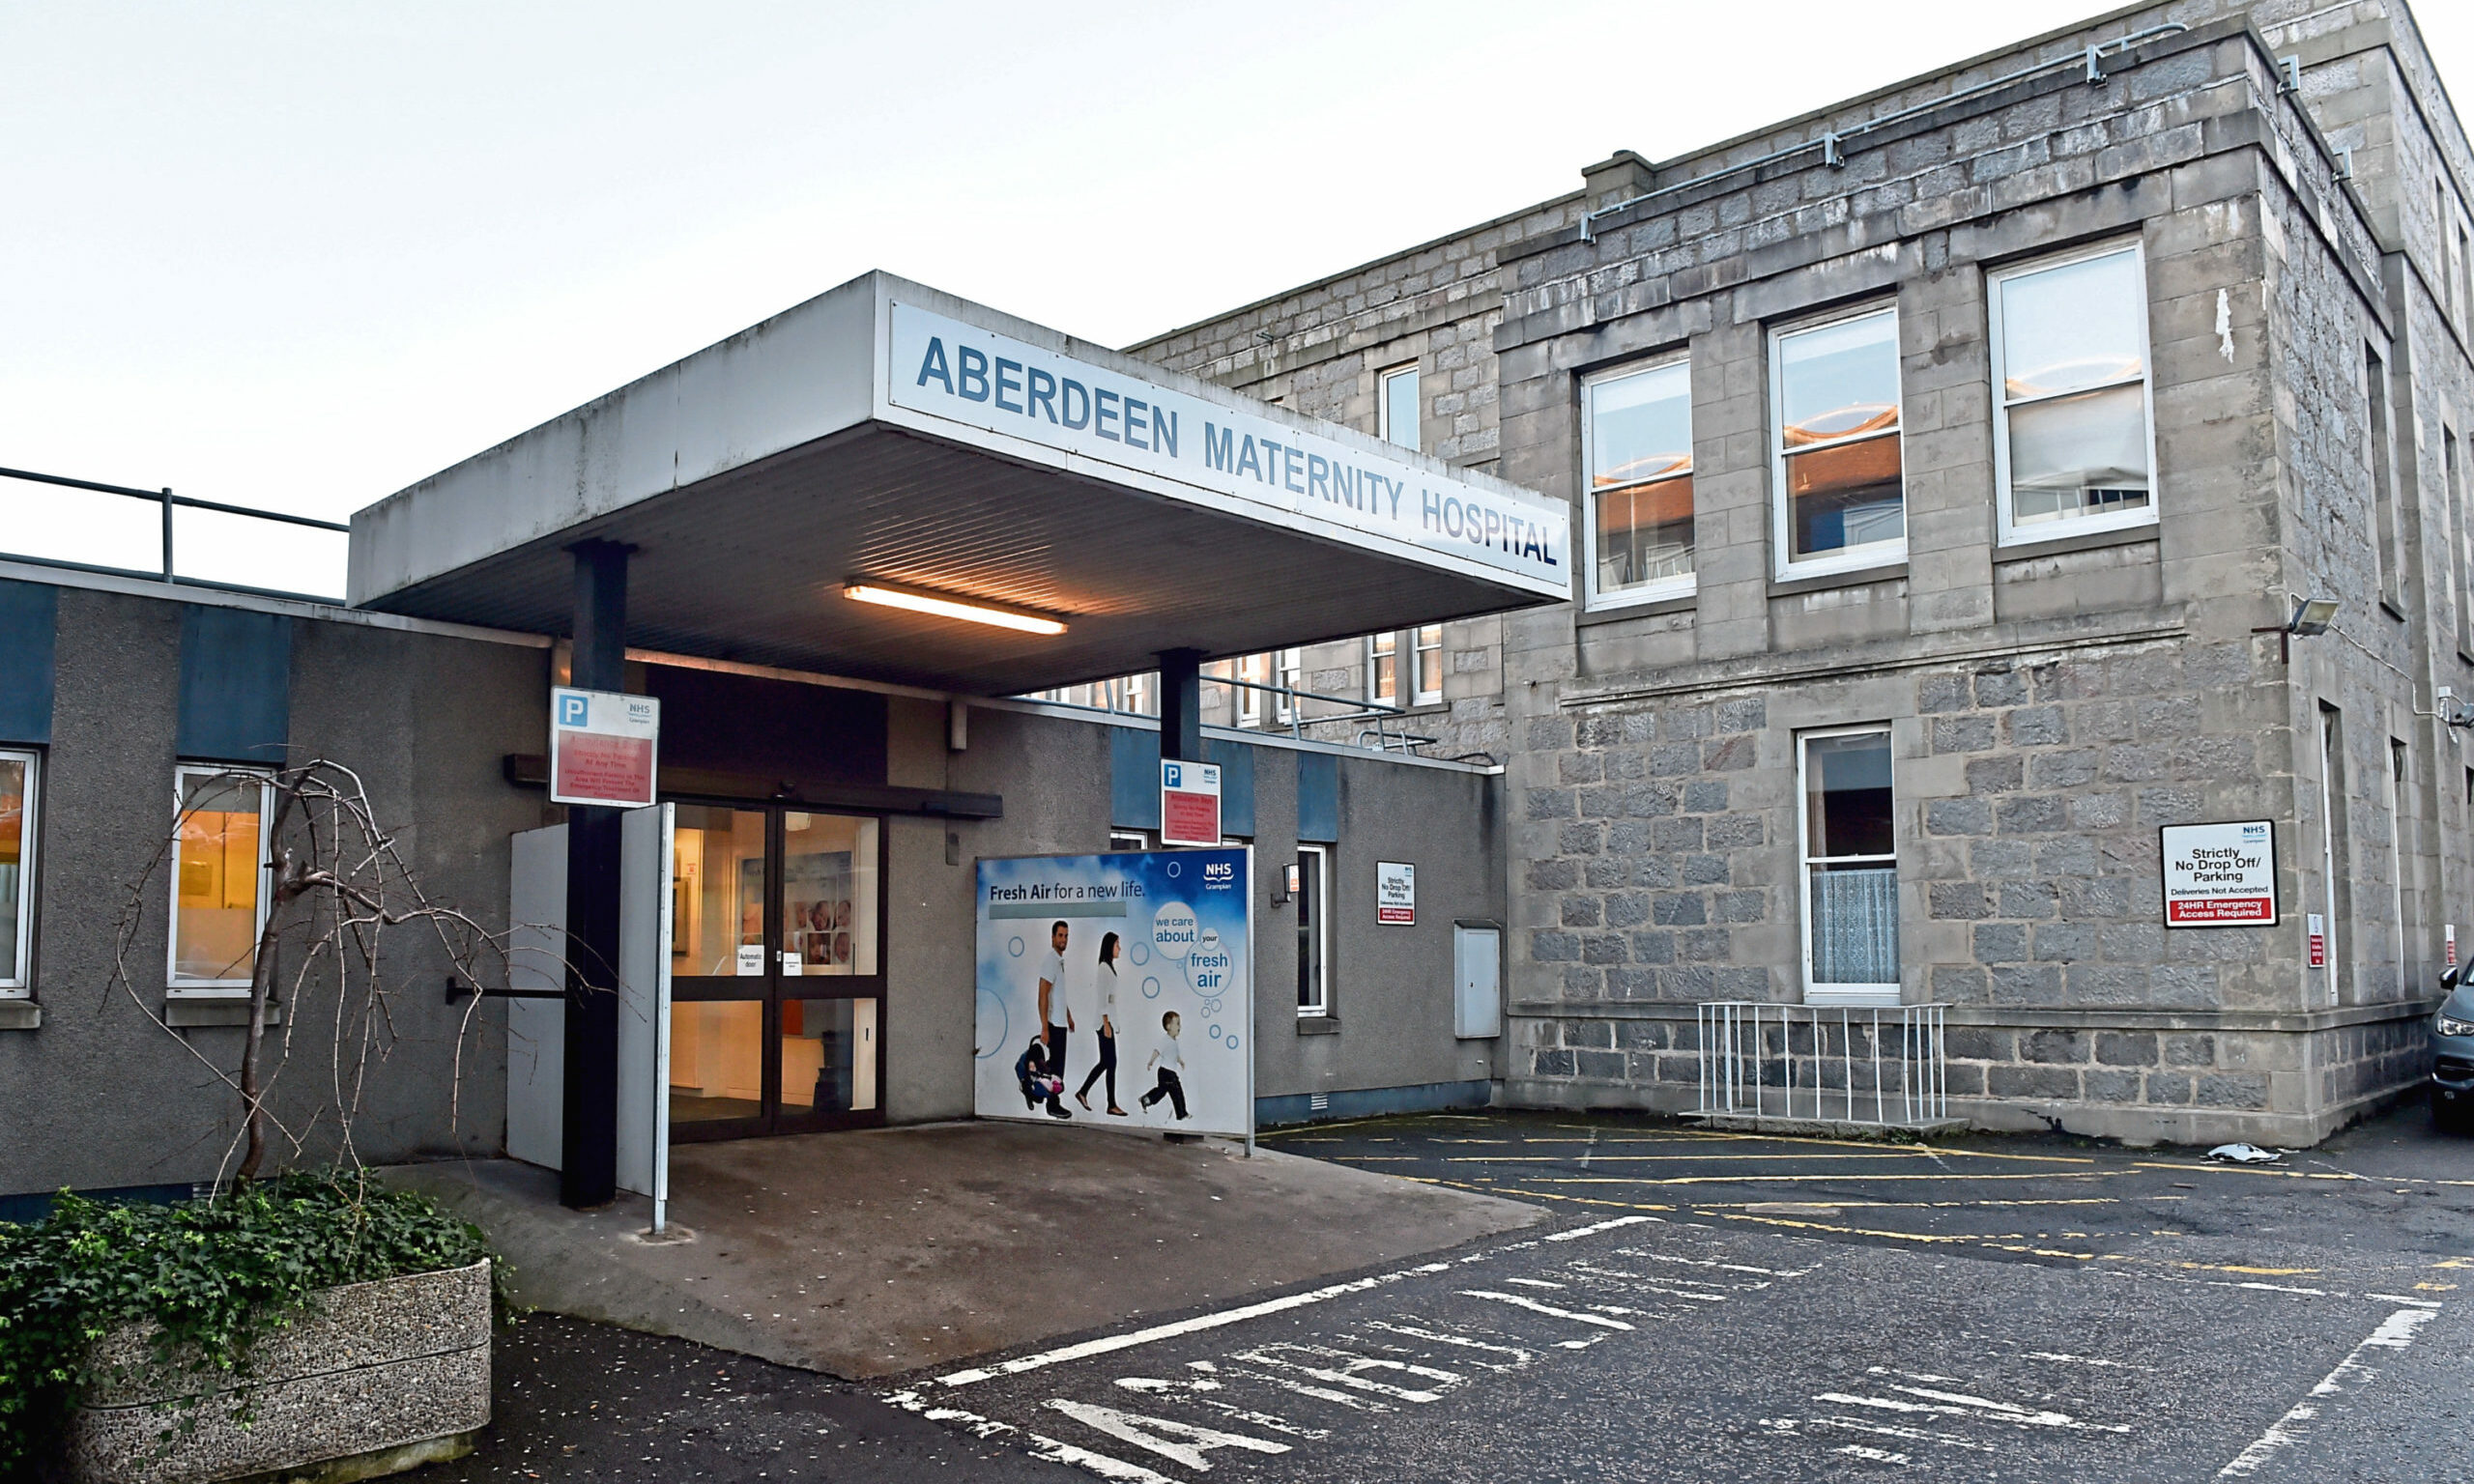 There are worries that women visiting Aberdeen Maternity Hospital could be harrassed.